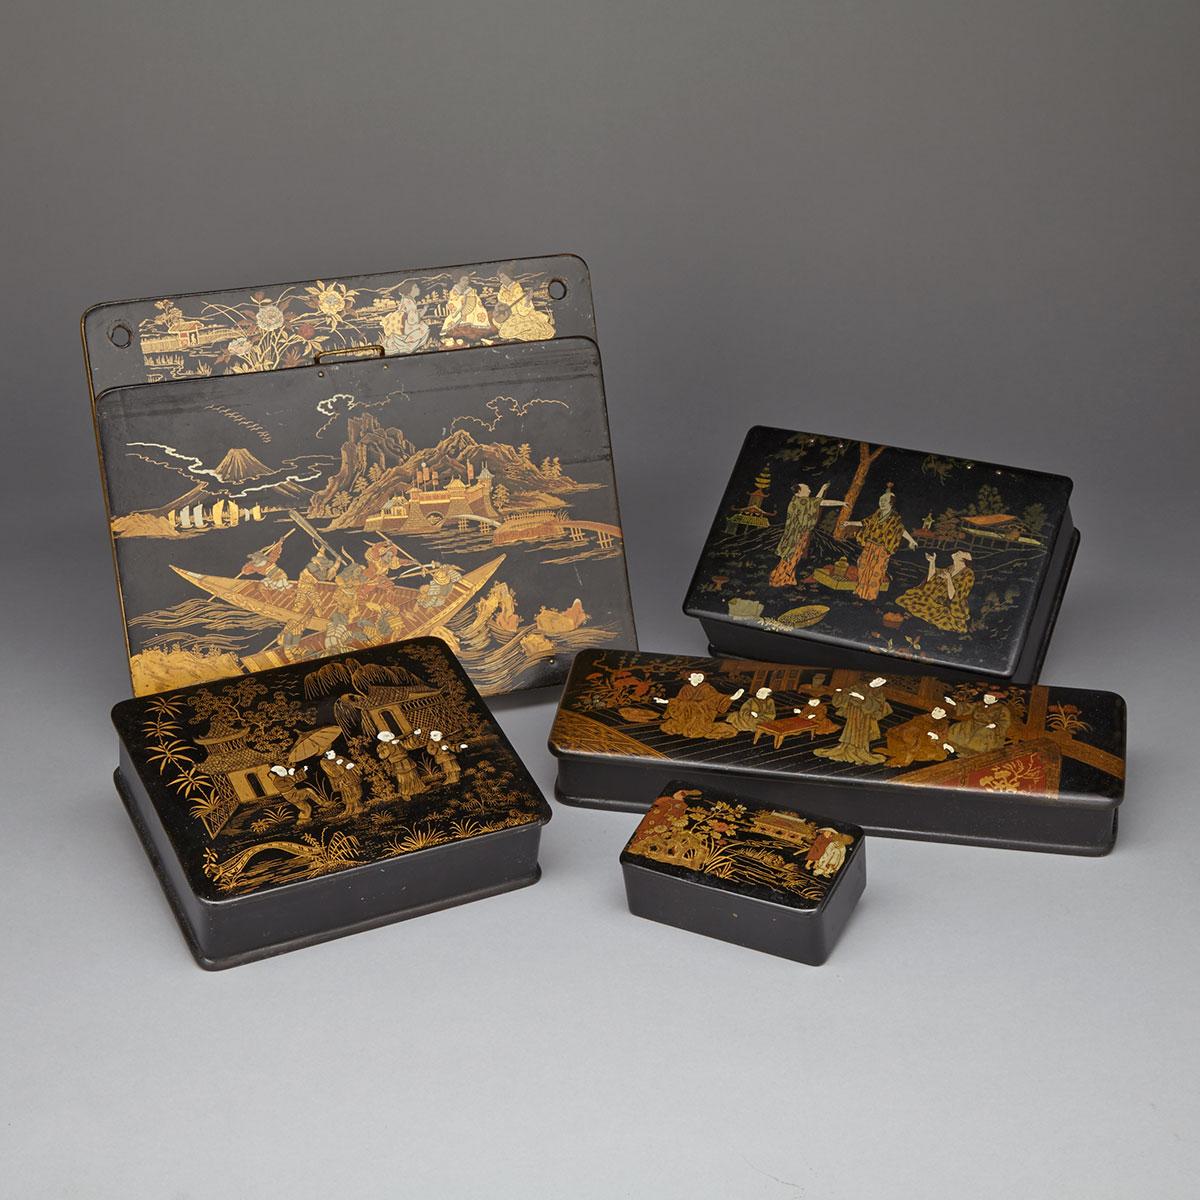 GROUP OF five CHINOISERIE lacquered PAPIER MACHÉ ITEMS, 19TH CENTURY